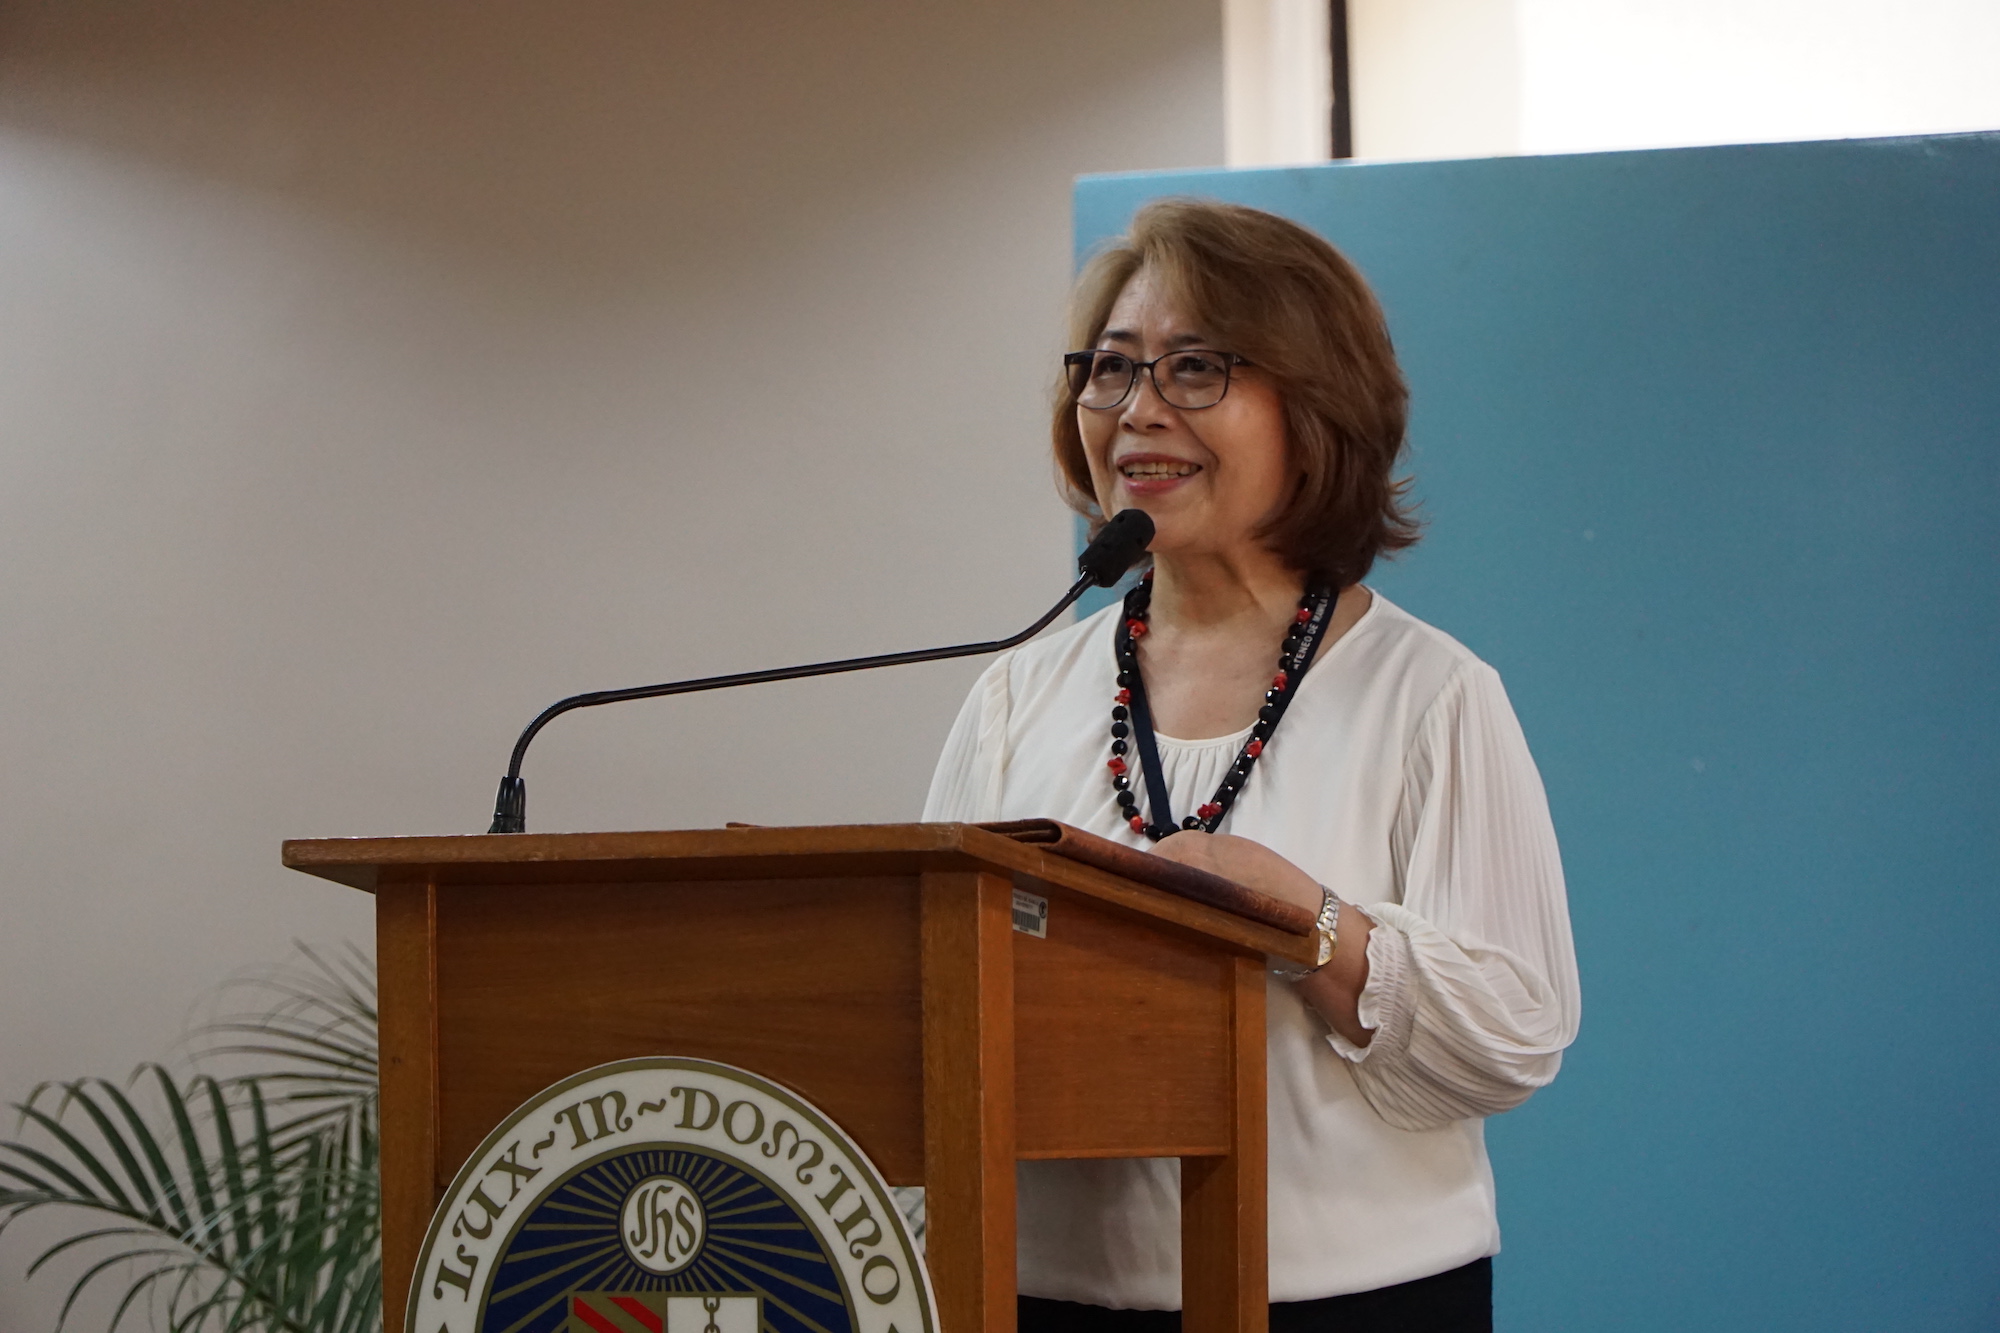 Dr Maria Luz C Vilches, Vice President for Higher Education, expresses her gratitude to Professor Warren for donating his professional library to the University